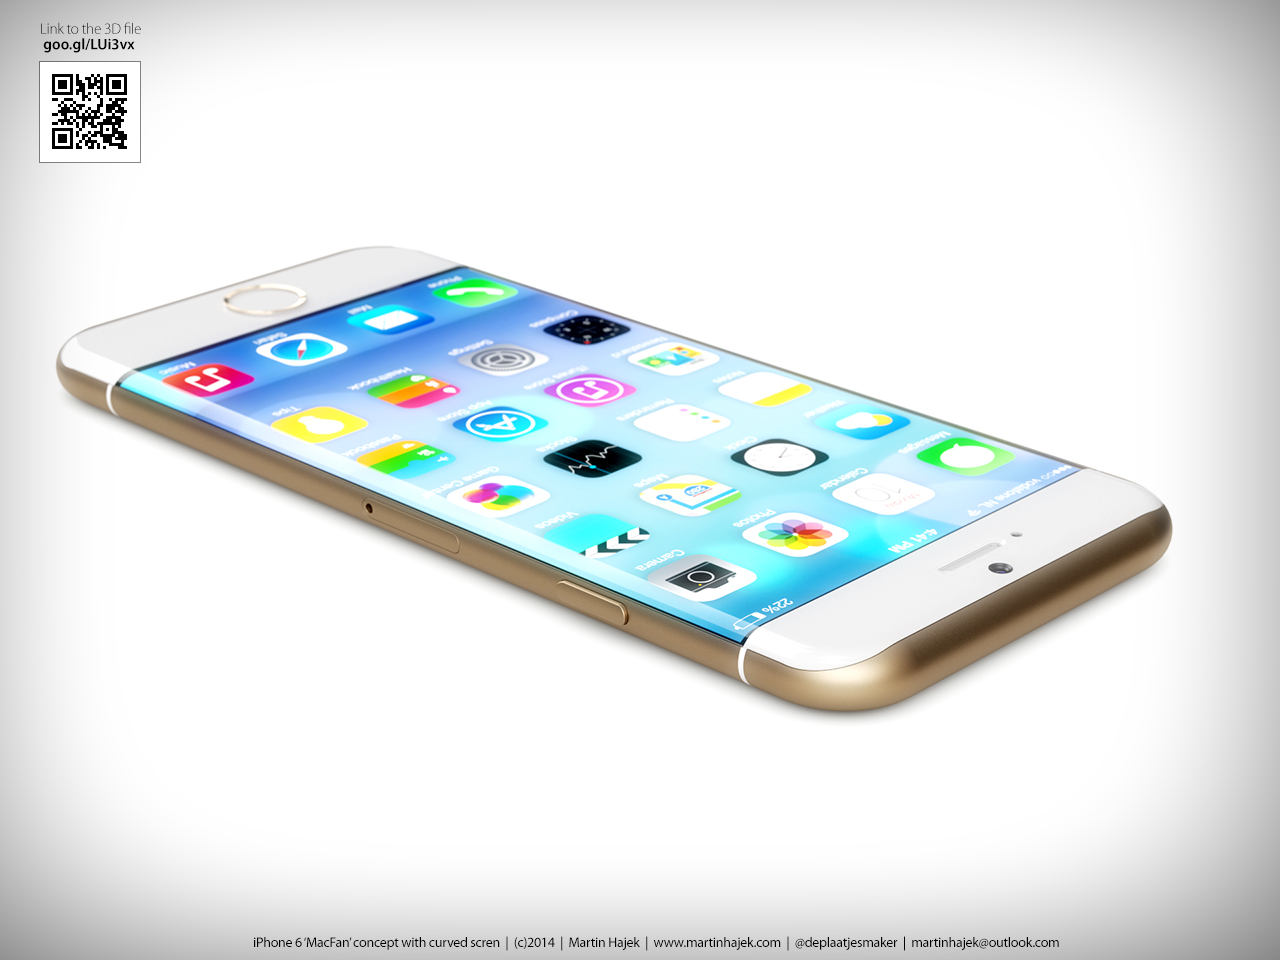 iPhone 6 Rumors: Photos of iPhone 6 with curved display and case  BGR